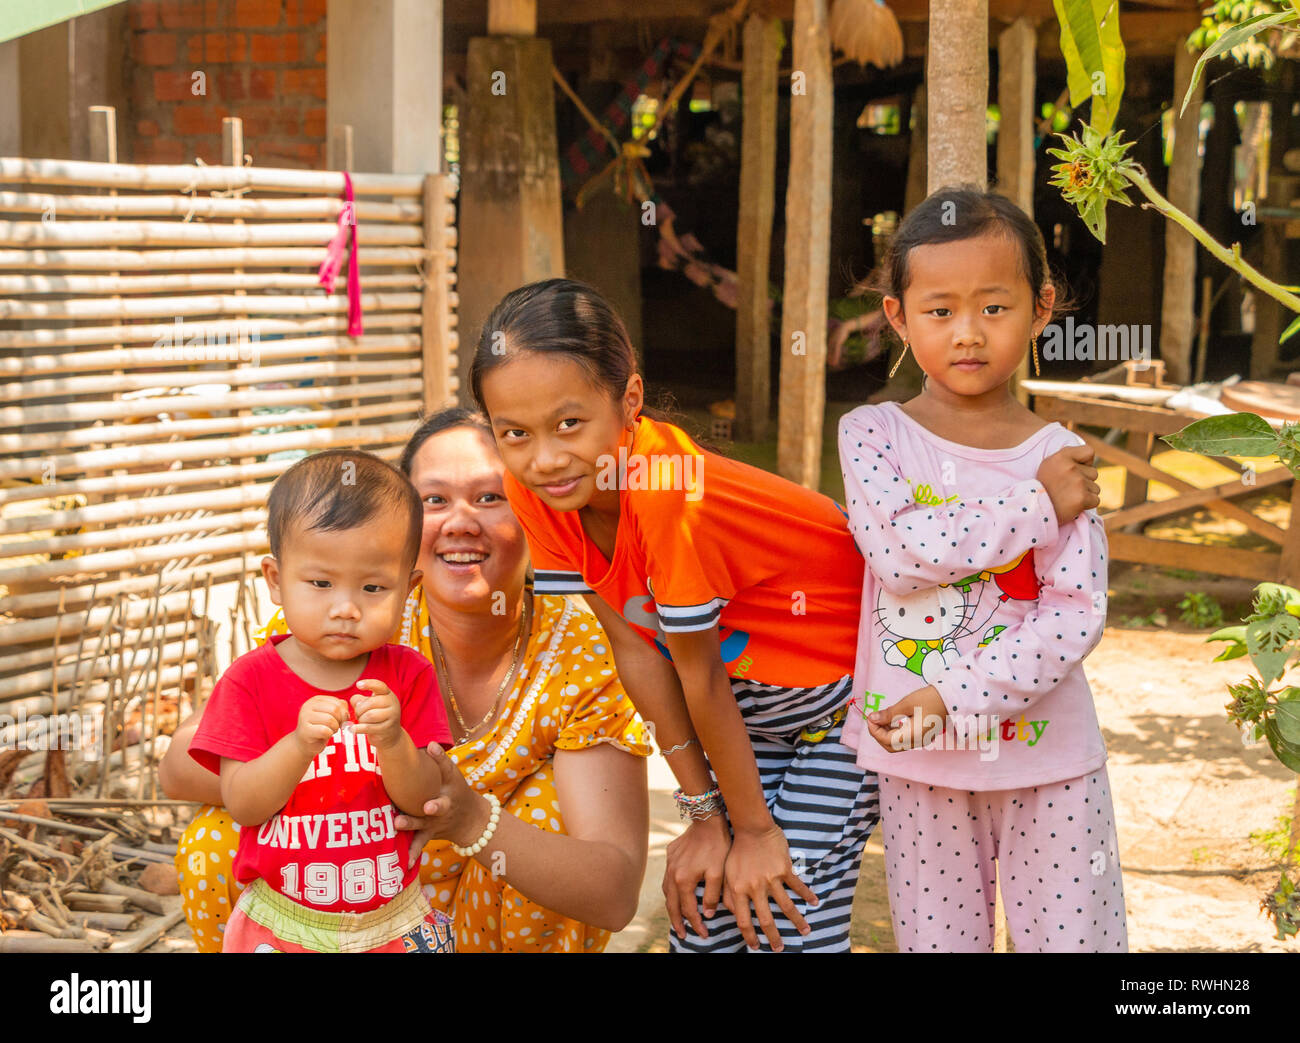 3 young happy, smiling Vietnamese  children of mixed ages wearing pyjamas with their mother outside their home  Tan Chau, Mekong Delta, Vietnam Stock Photo